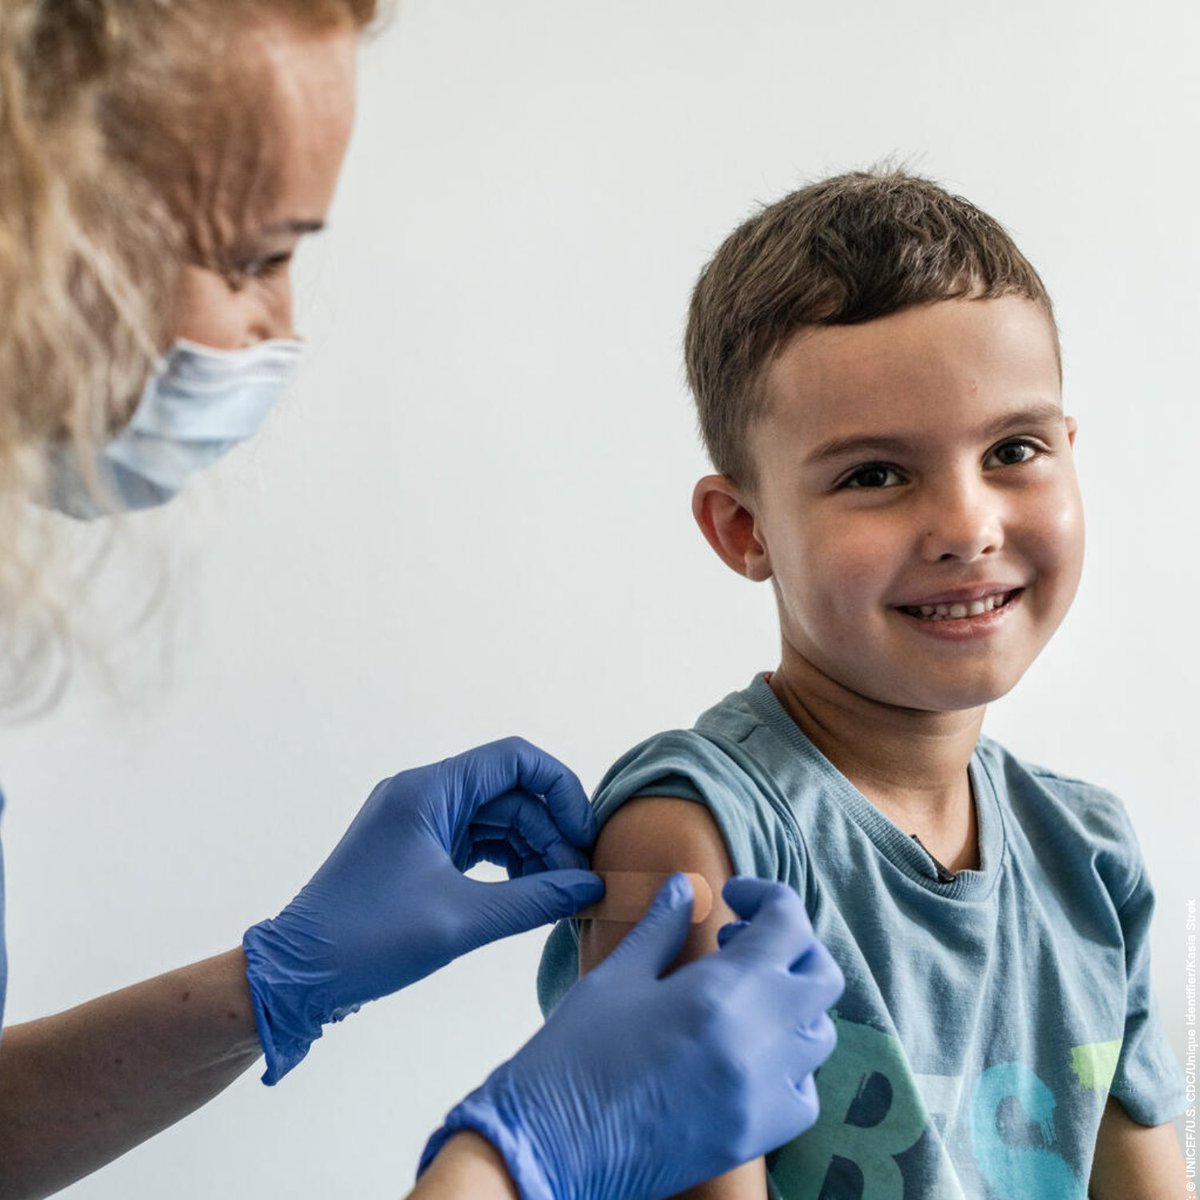 An estimated 1 in 4 kids in Canada missed their scheduled immunization shots in 2021. More needs to be done to ensure Canada meets its coverage goal of 95% for all recommended childhood vaccines.
#KidsVaccinesDay